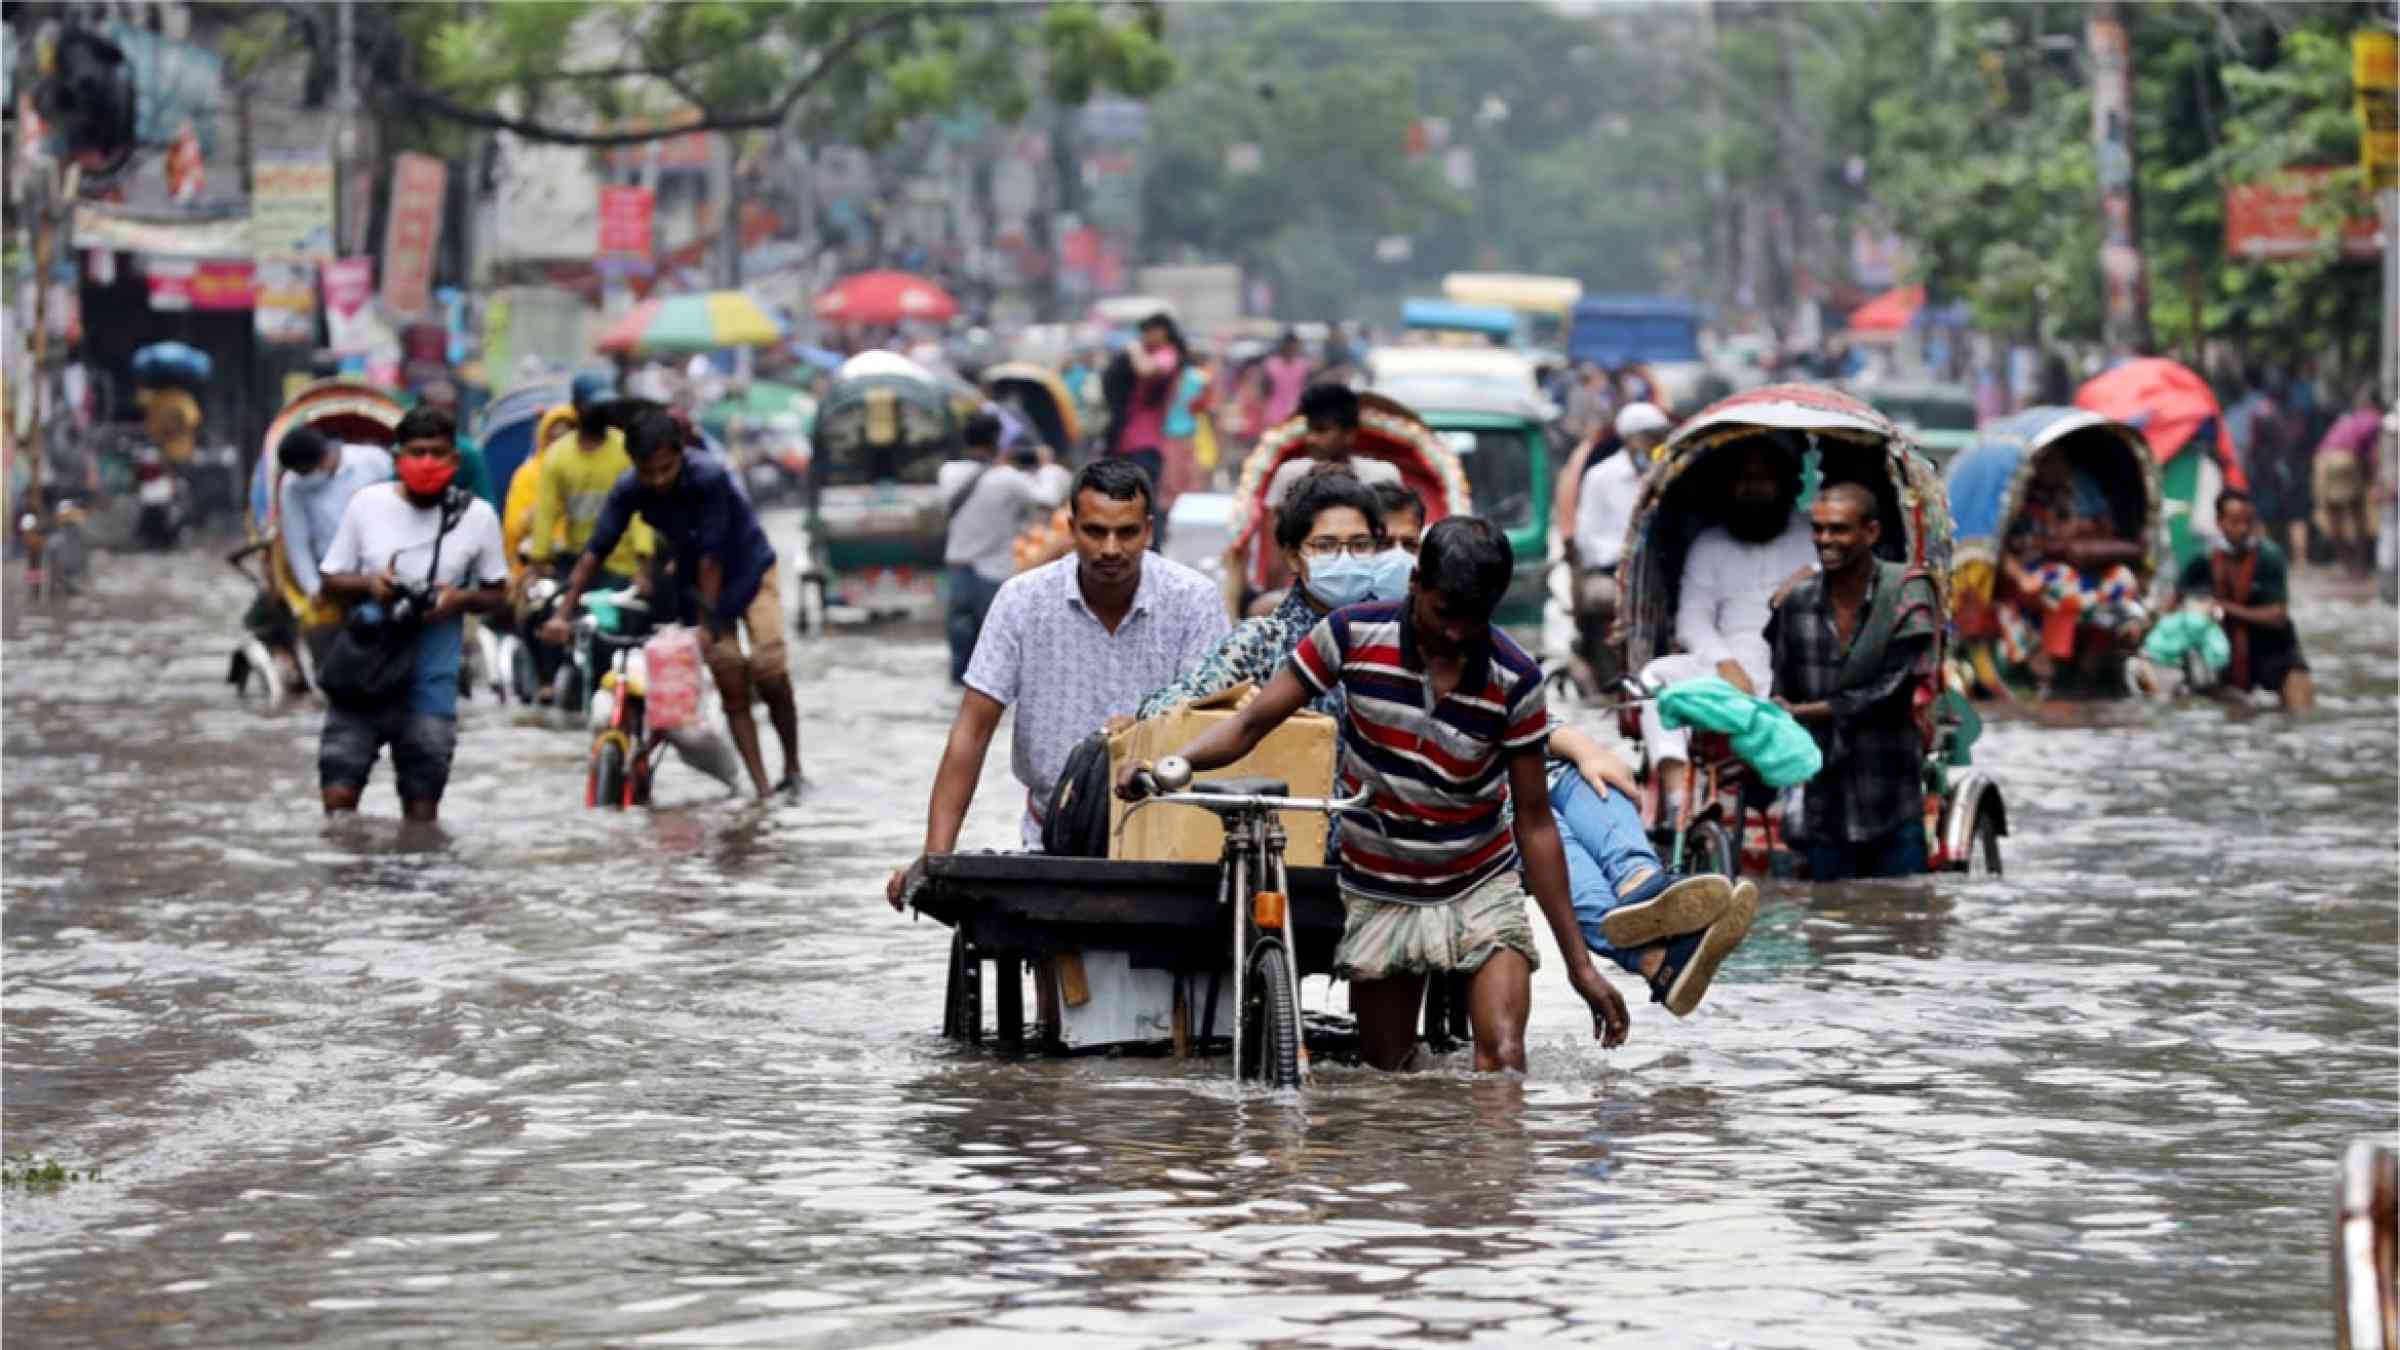 Riksha drivers walking through the flooded streets in Bangladesh in 2020.